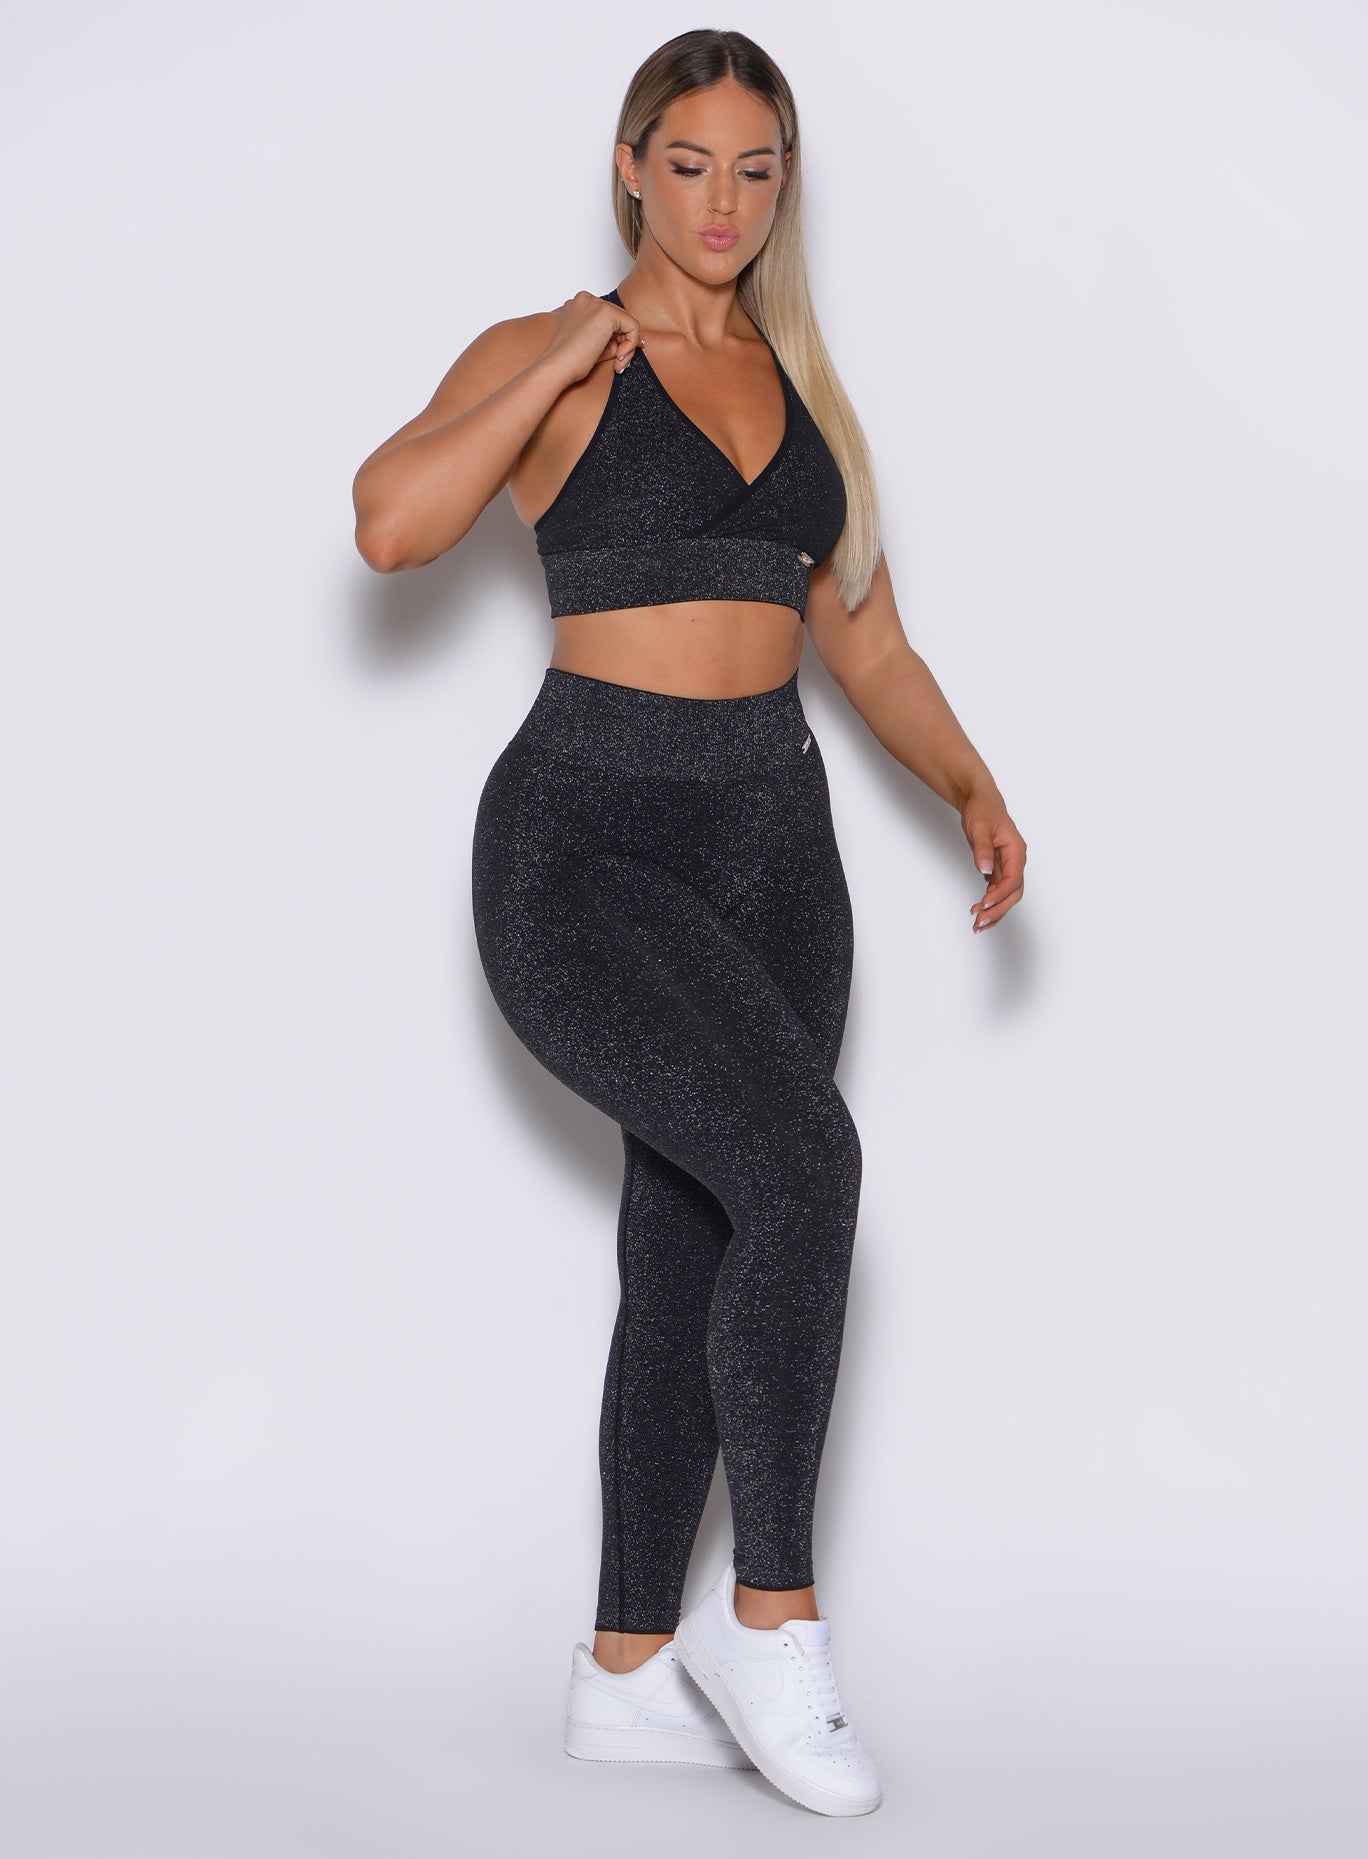 front  side profile view of a model holding her left bra strap wearing our Shimmer Seamless Leggings in black sparkle color along with the matching bra